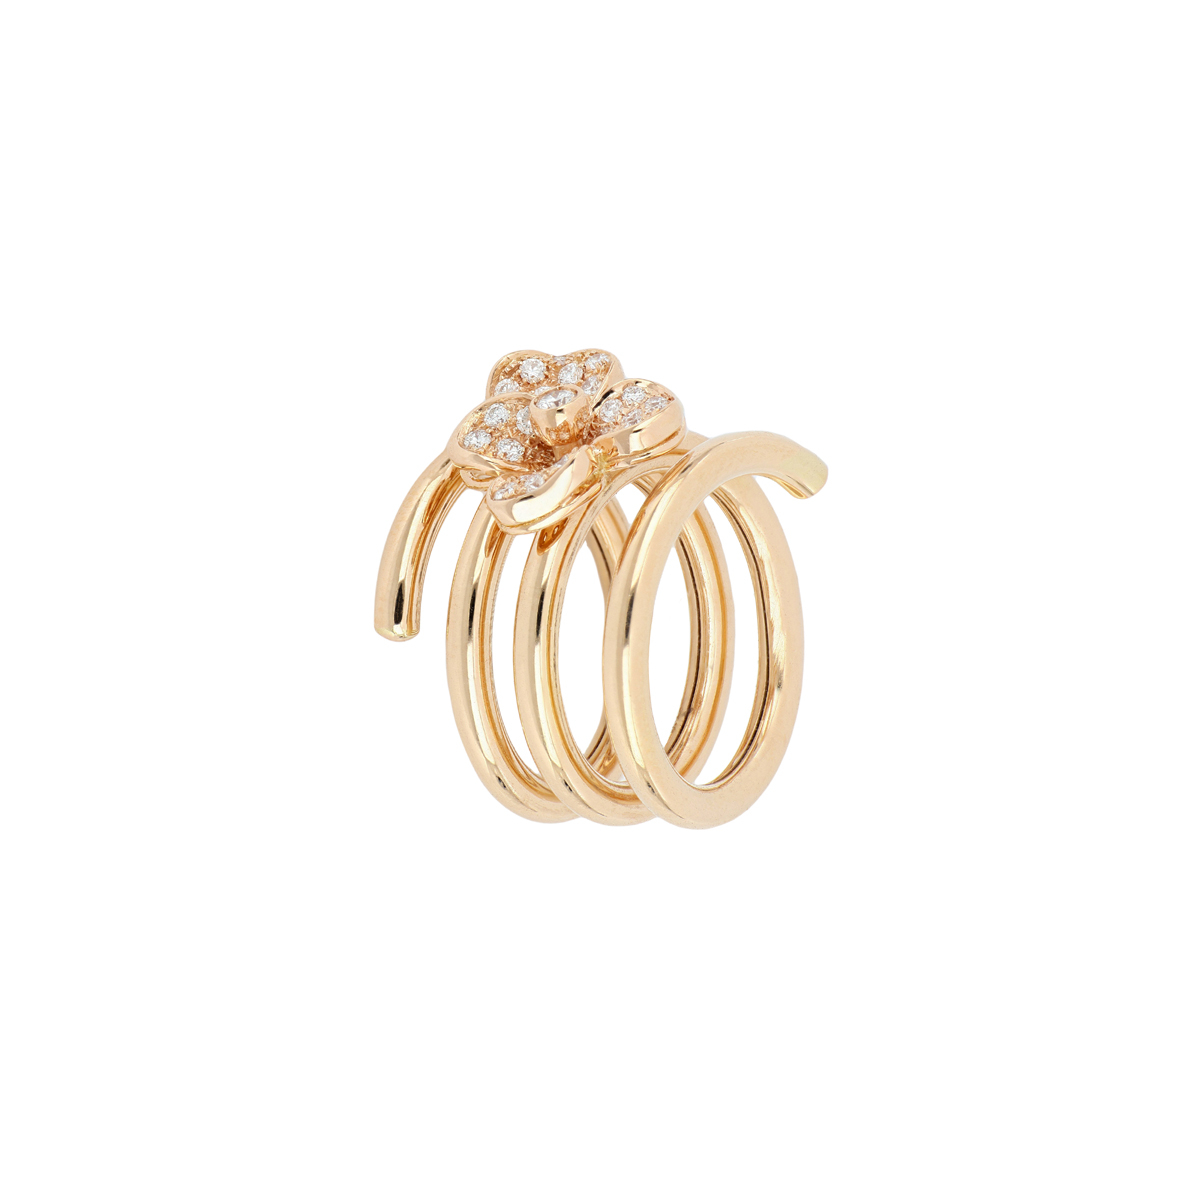 Red Gold Spiral Ring with Diamond-Enriched Flower